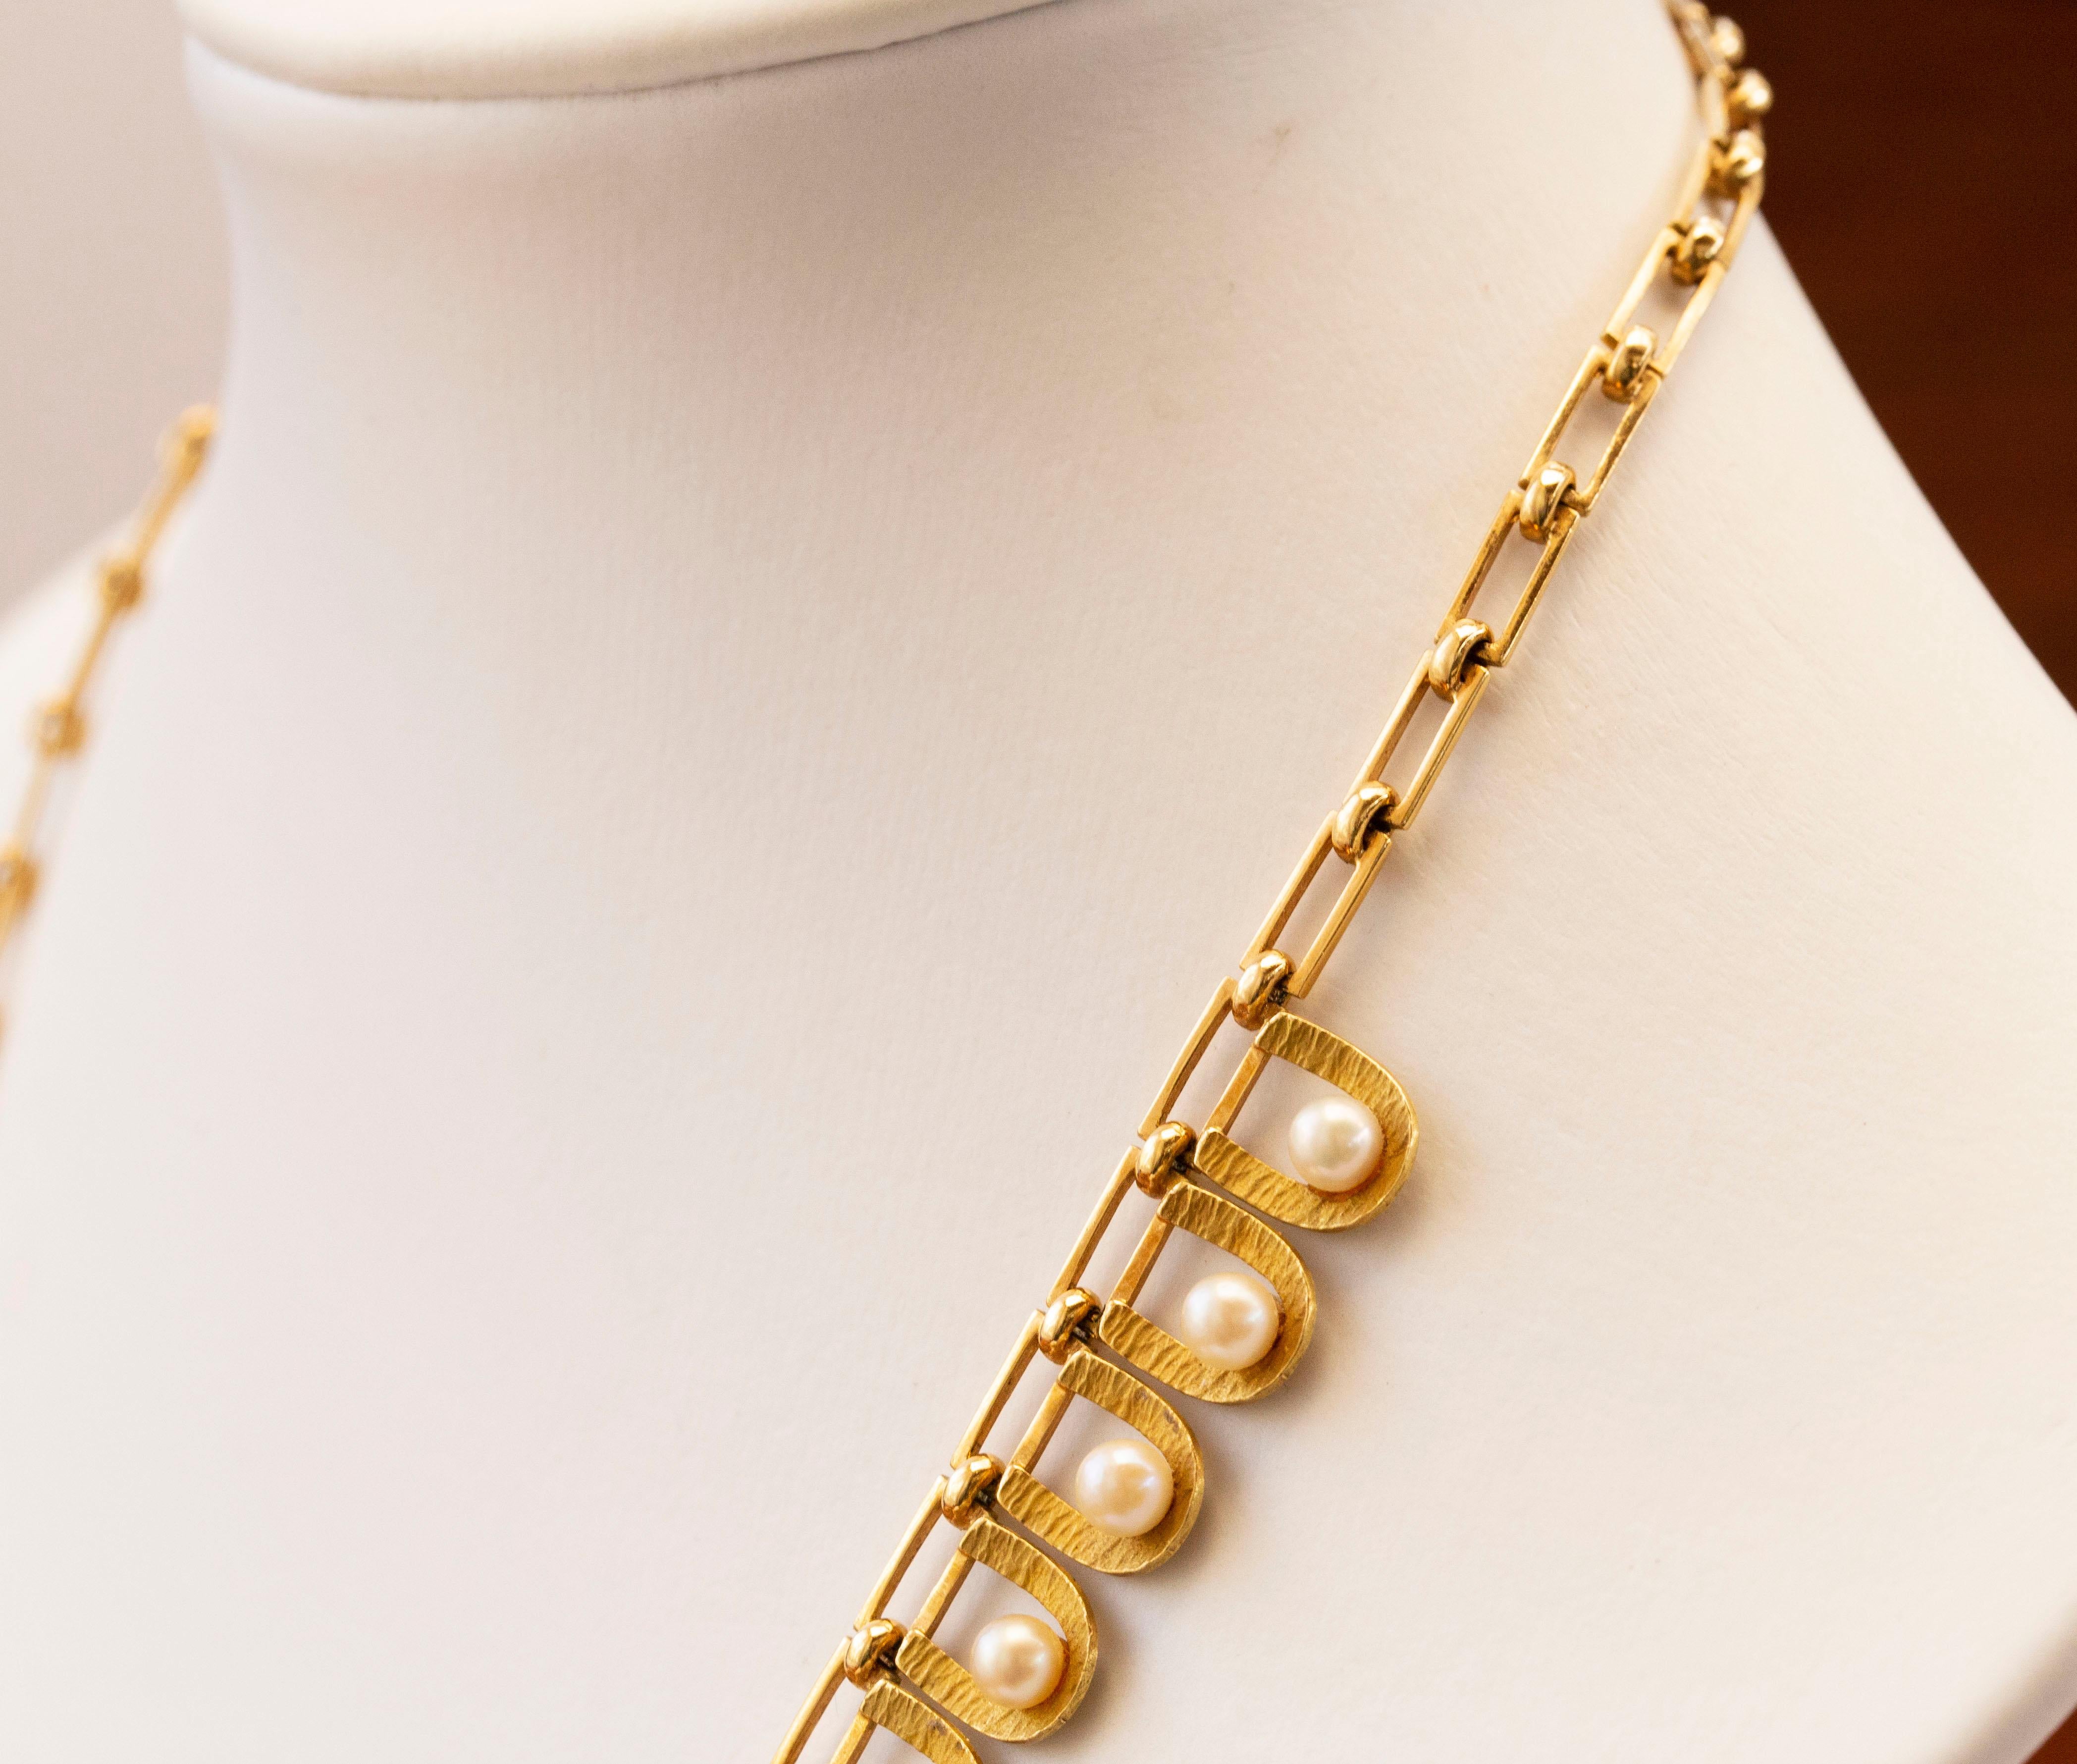 14 Karat Yellow Gold Choker Link Necklace with Cultivated Akoya Pearls  1